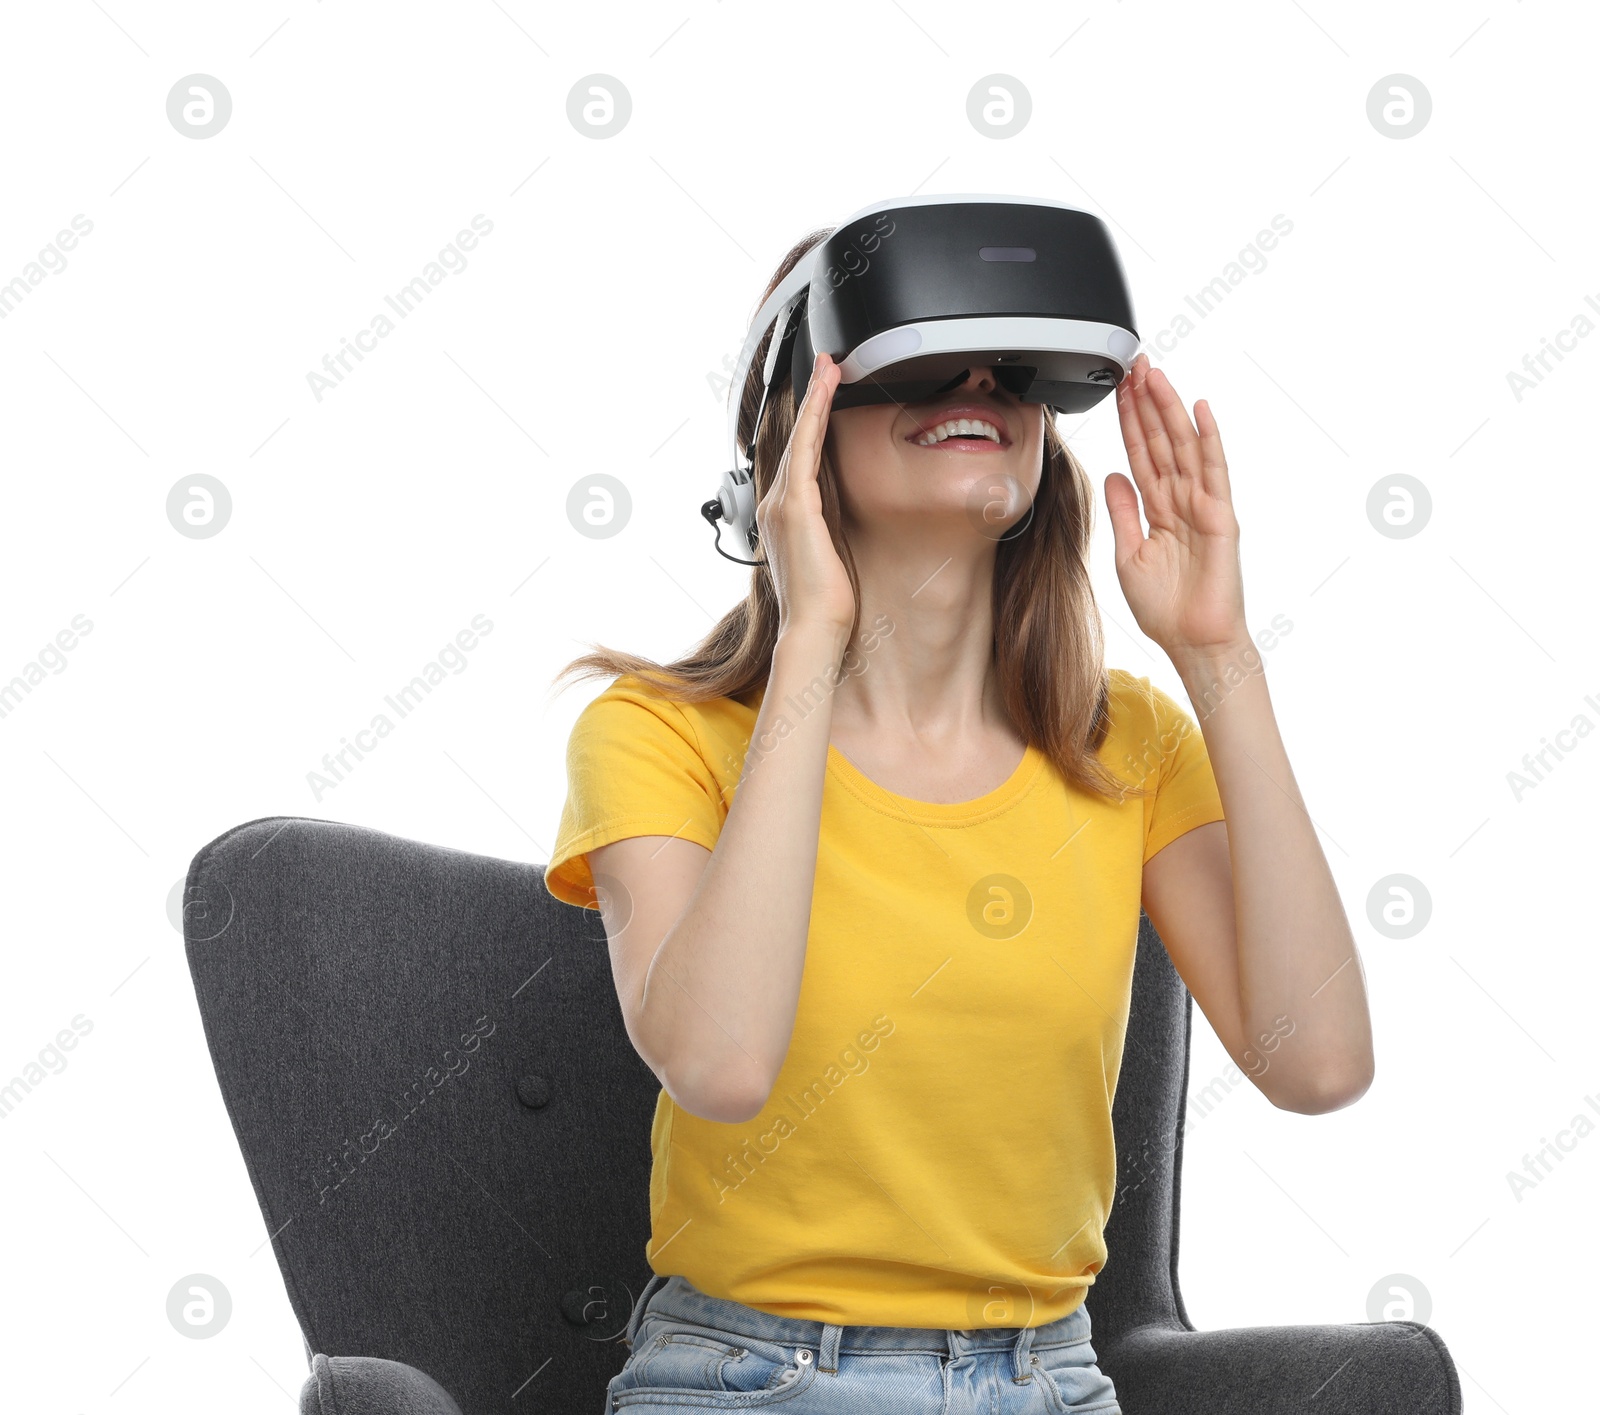 Photo of Smiling woman using virtual reality headset while sitting in armchair against white background